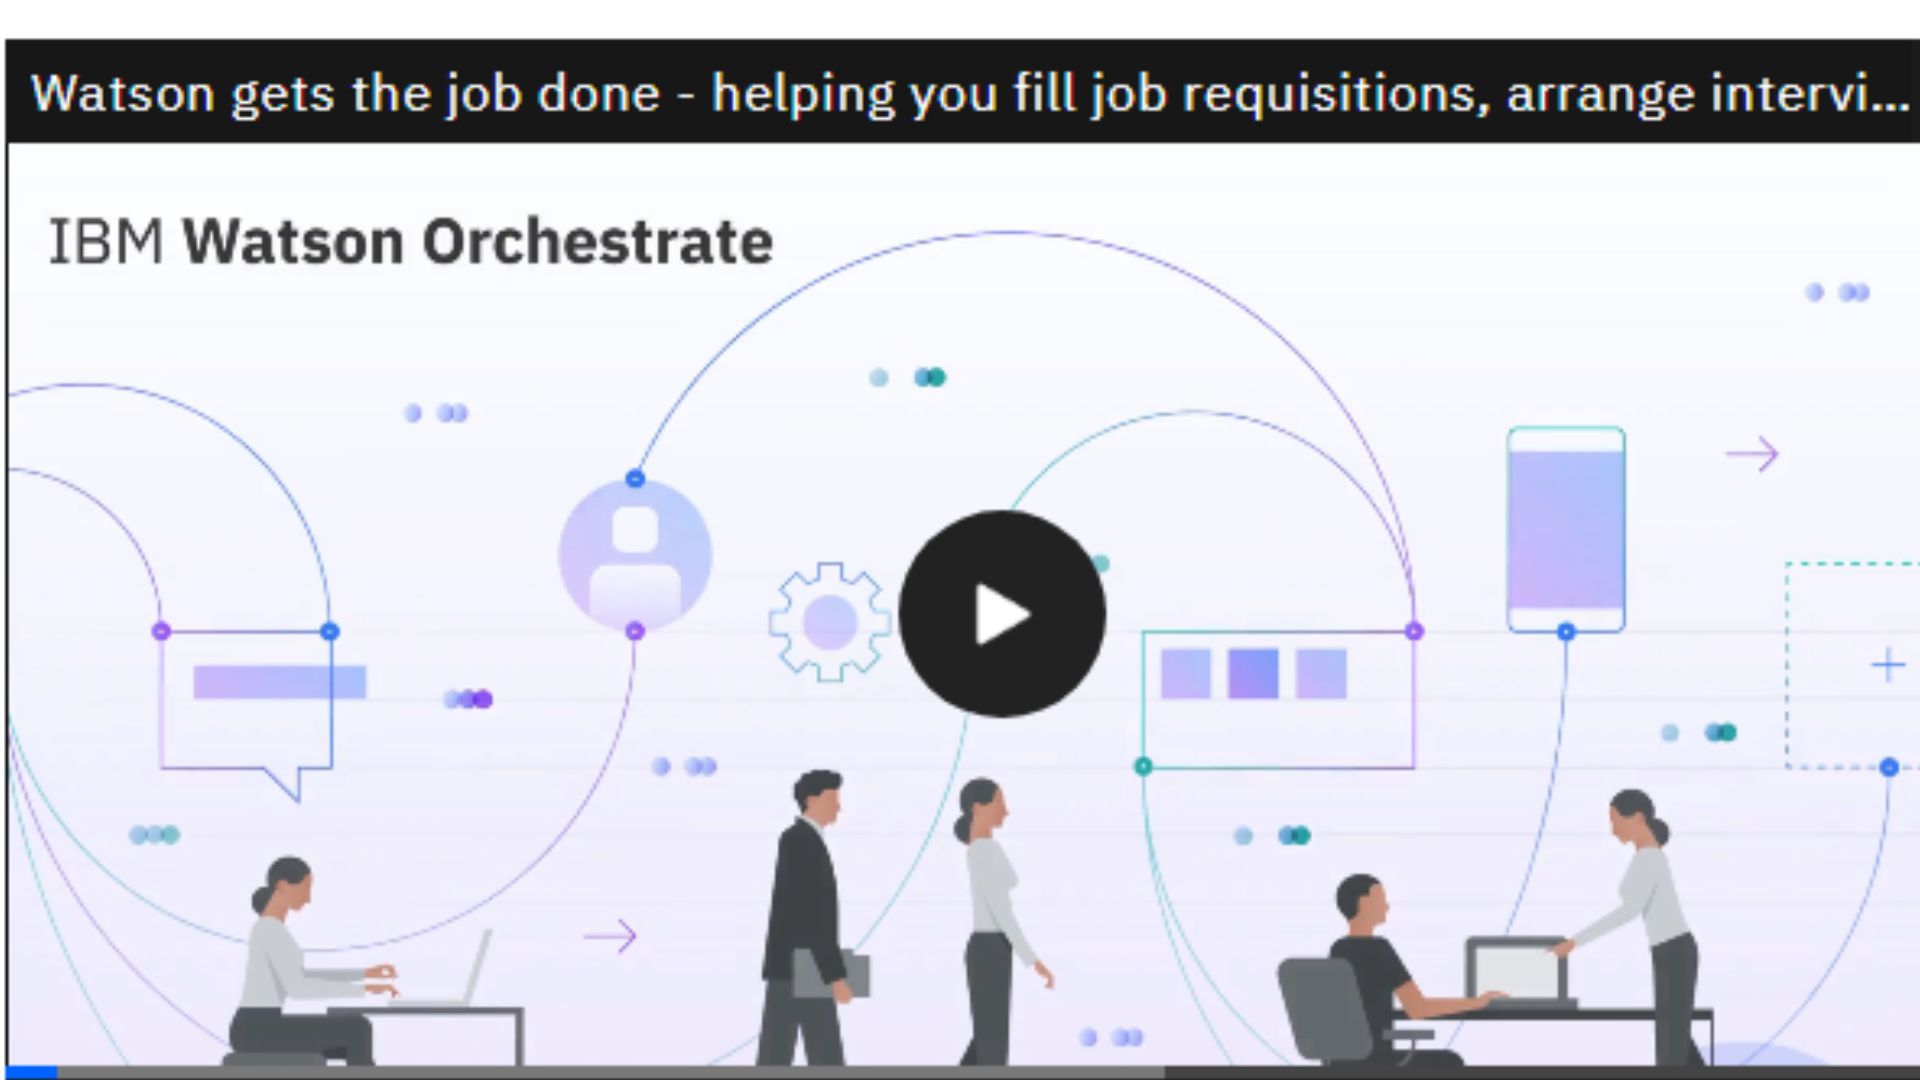 Watson Orchestrate by IBM